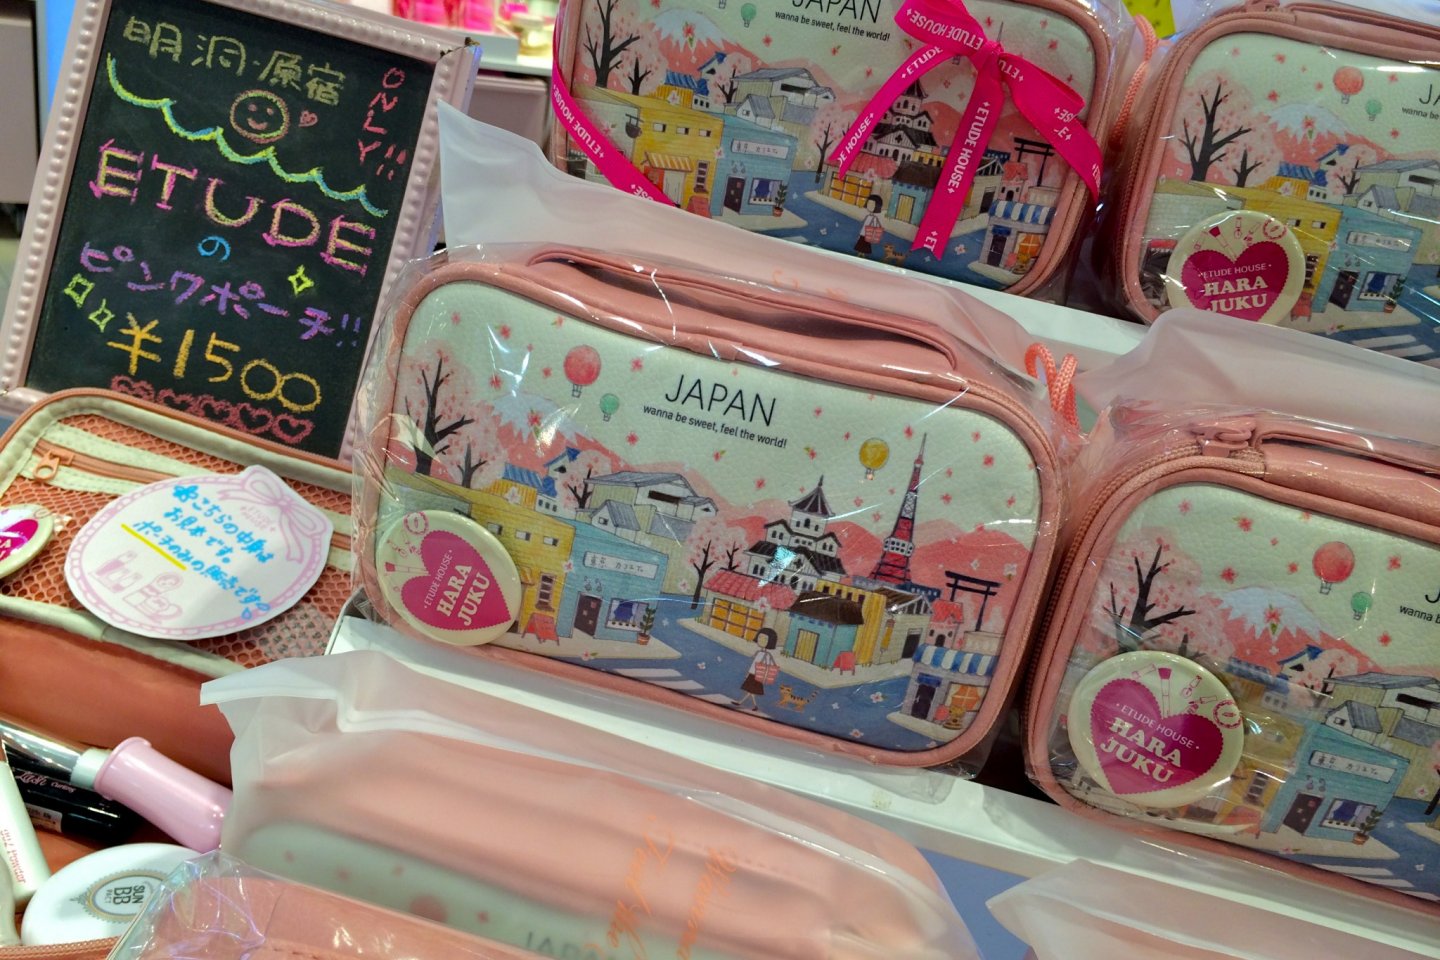 Etude House Harajuku, a popular Korean cosmetic line, is currently offering these adorable souvenir cosmetic bags for 1,500yen